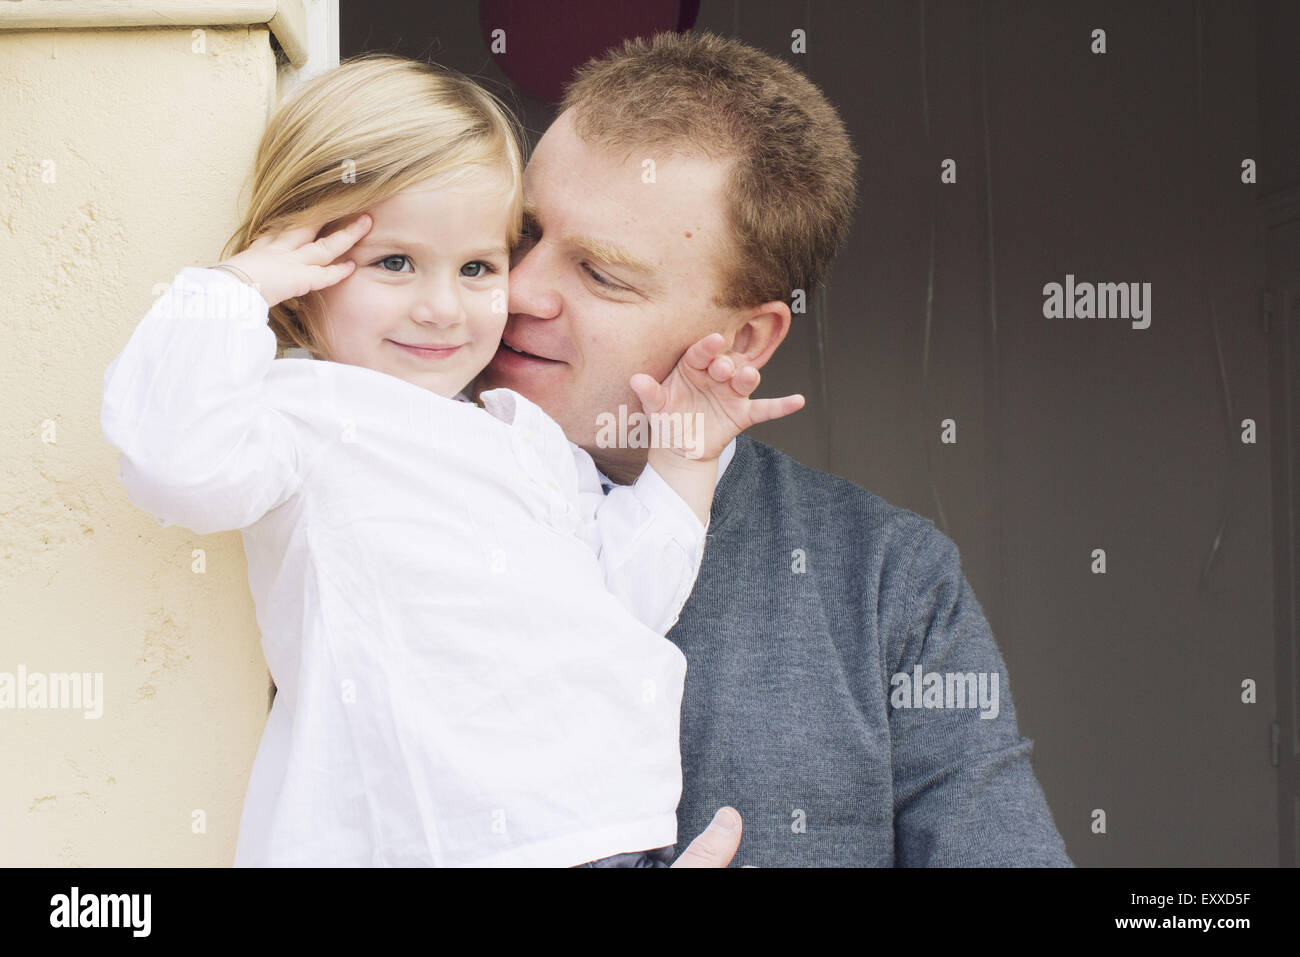 Father and daughter, portrait Stock Photo